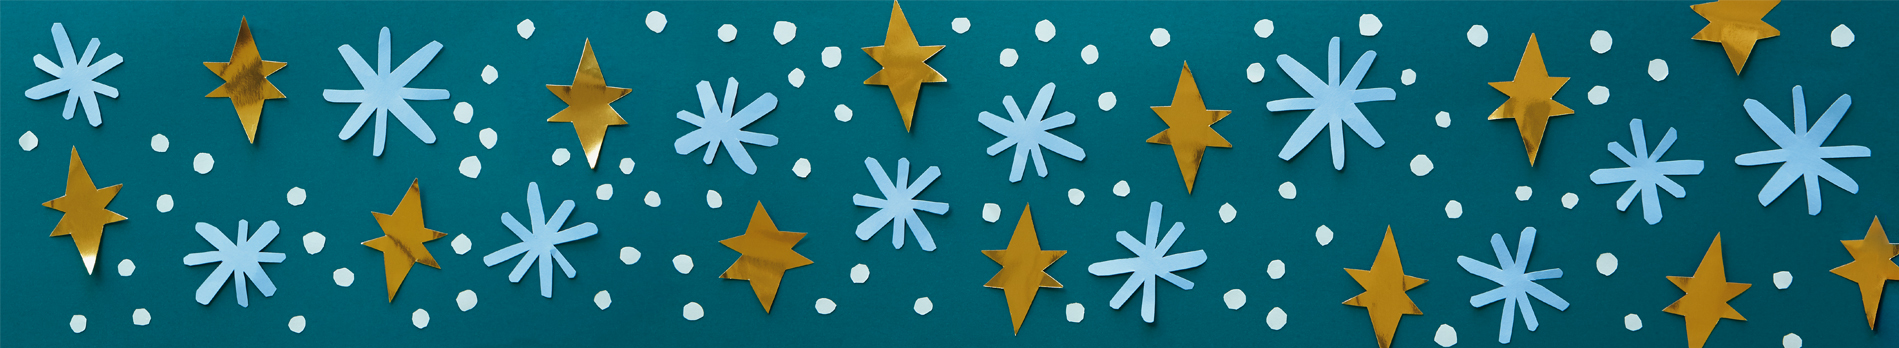 Winter background with paper cut snowflakes and stars on a dark green surface